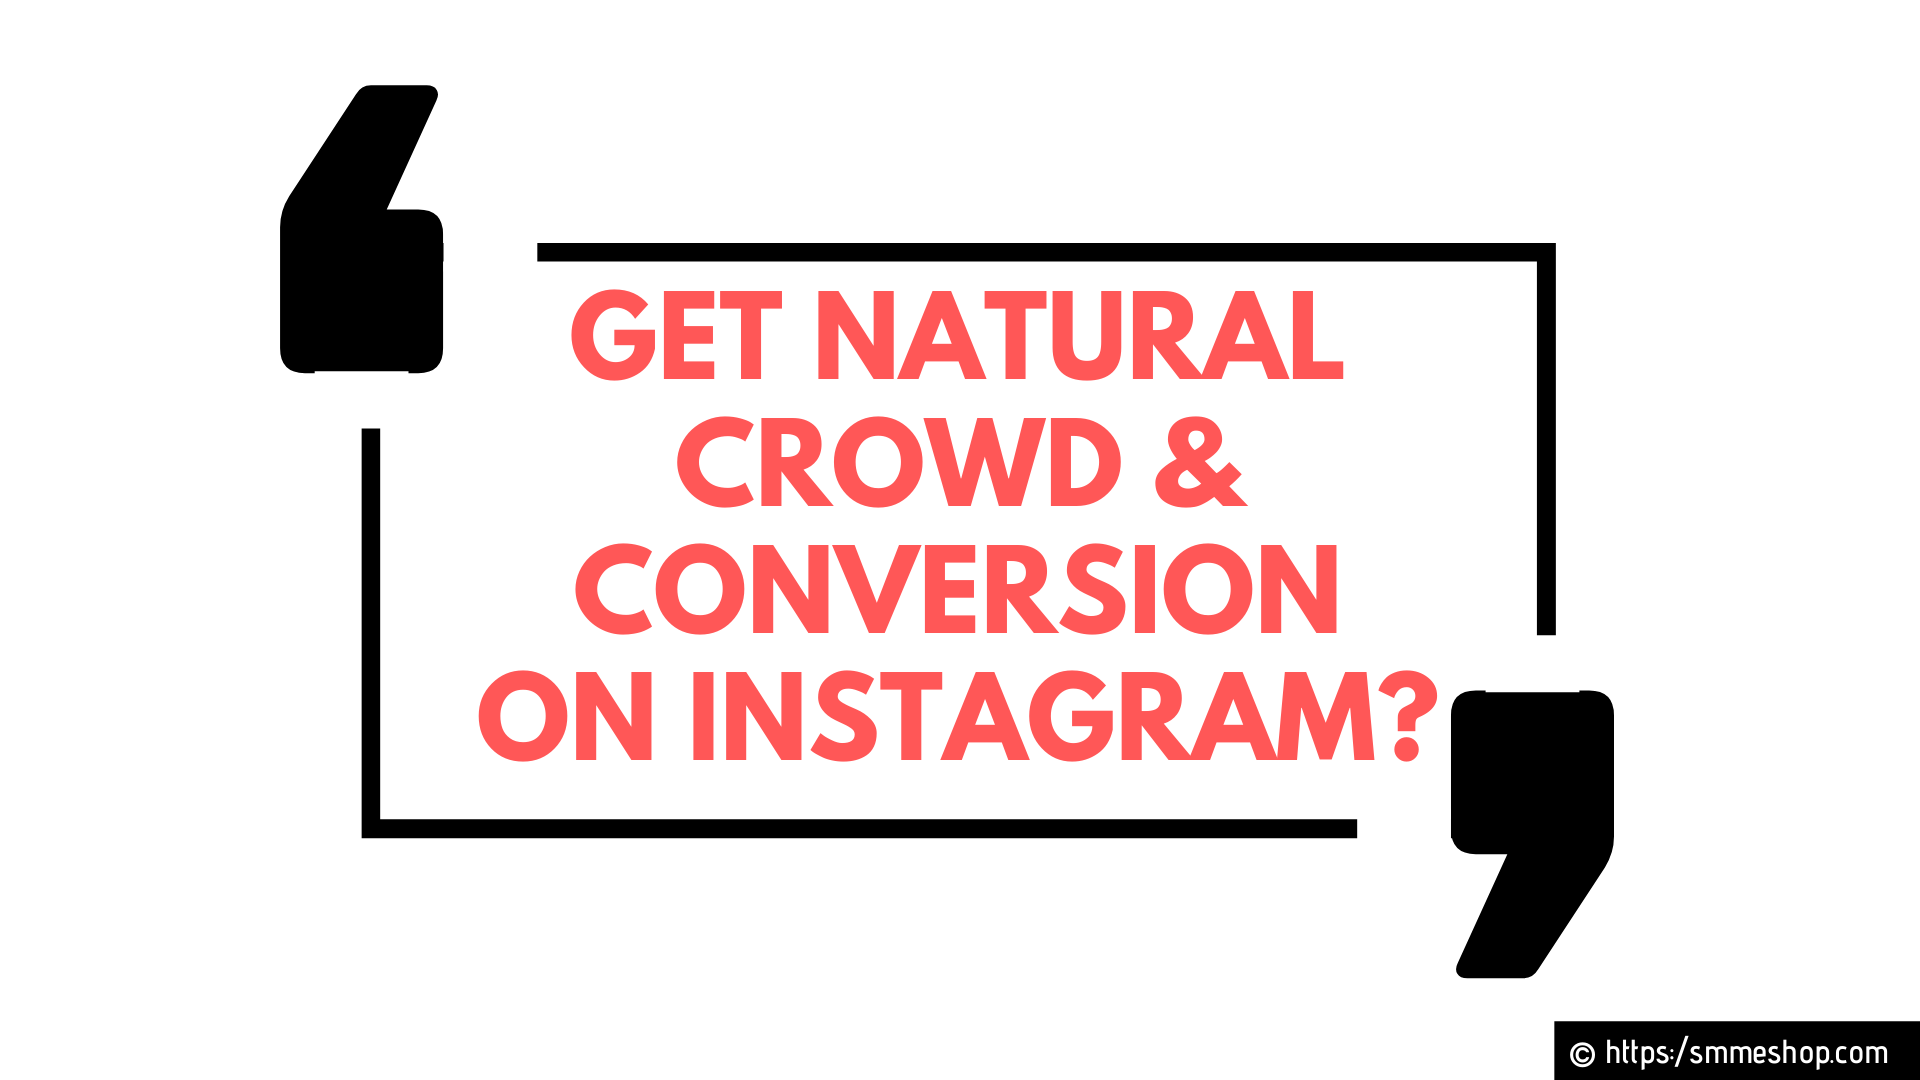 How to Get Natural Crowd And Conversion On Instagram?